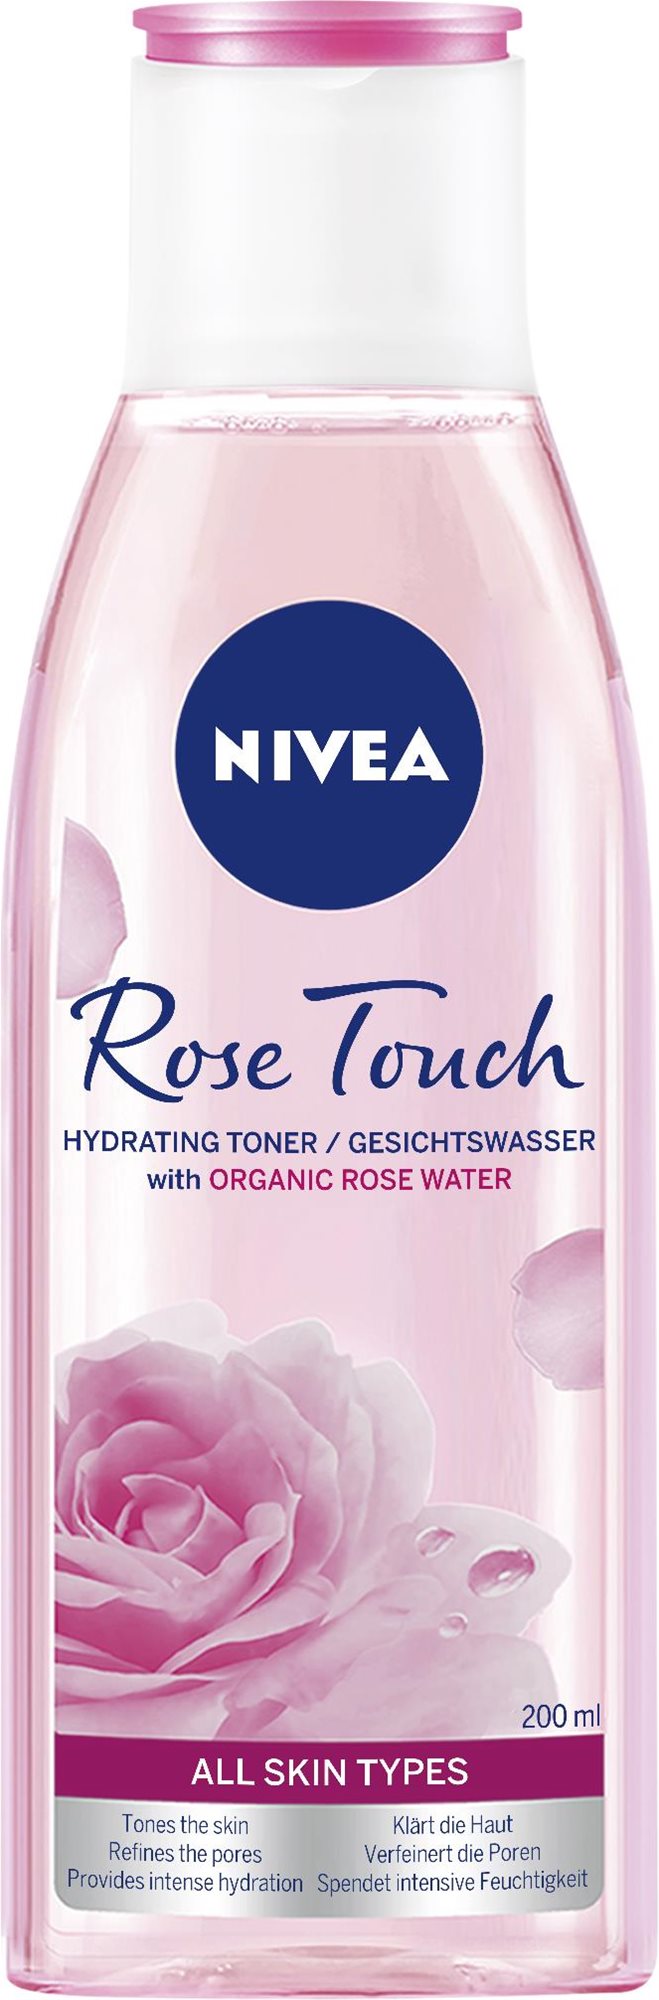 NIVEA Rose Touch Cleansing Toner 200 ml